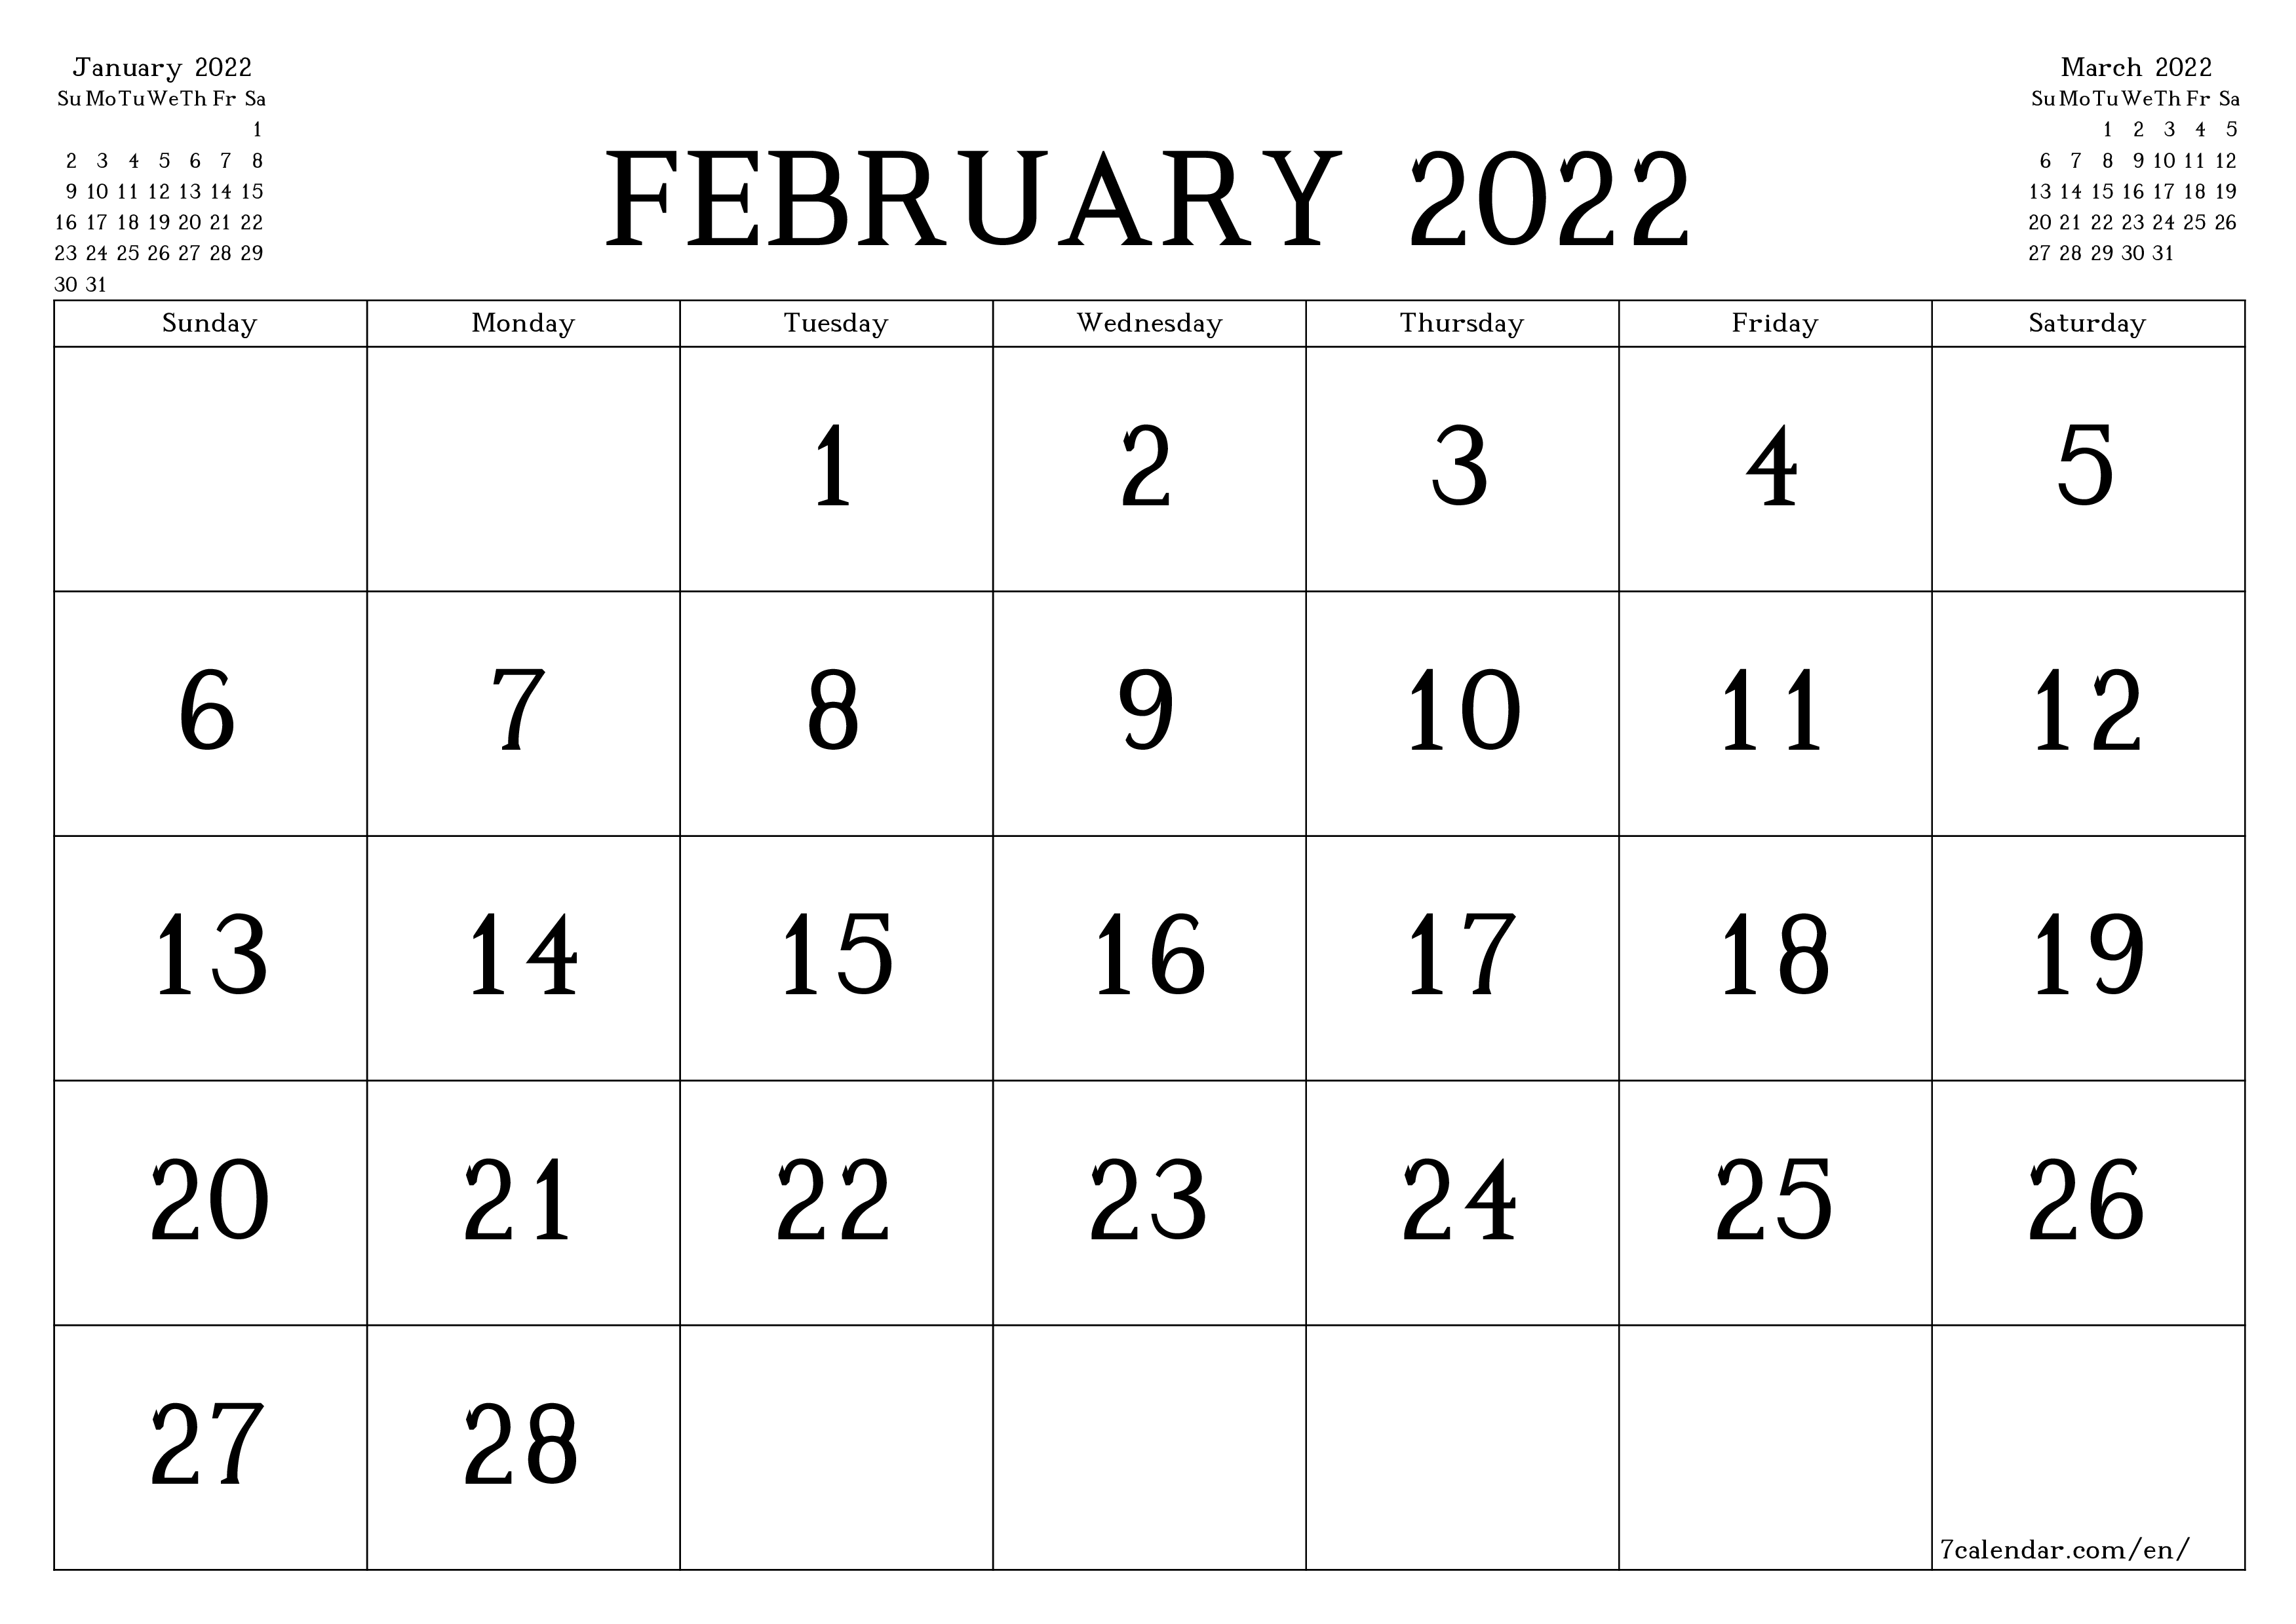 Blank monthly printable calendar and planner for month February 2022 with notes save and print to PDF PNG English - 7calendar.com